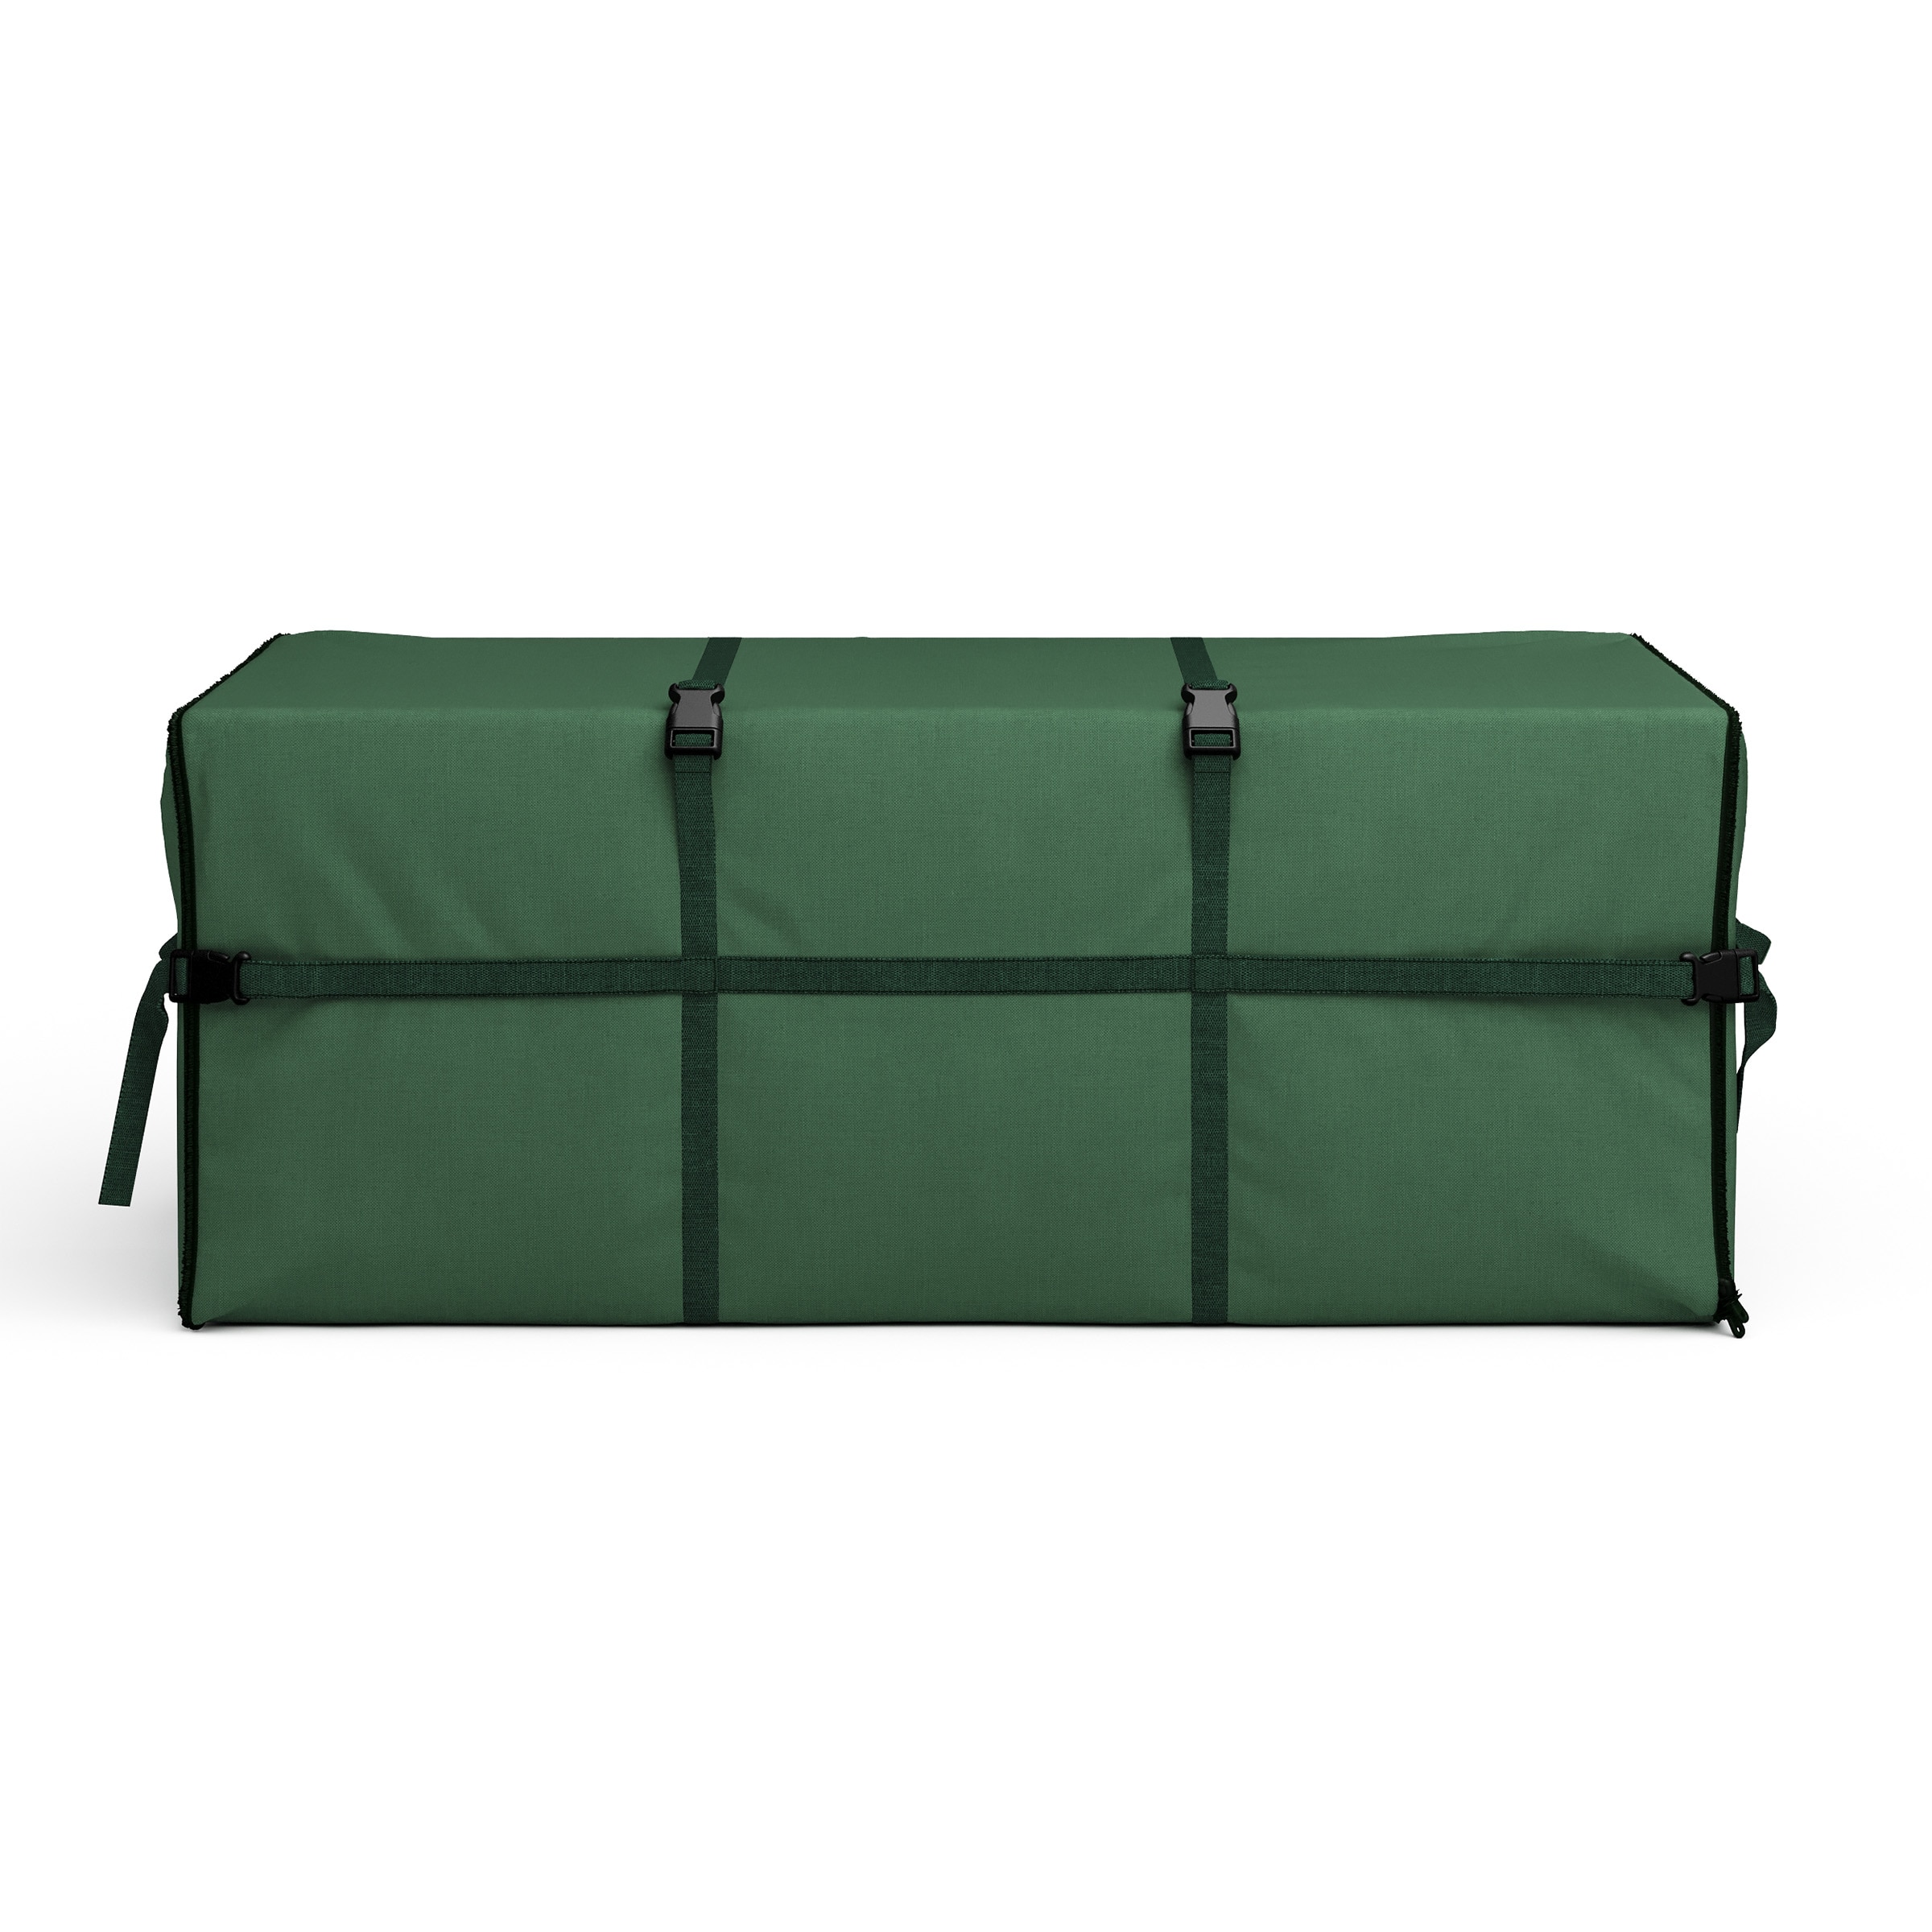 OSTO Christmas Light Reels Storage With Bag, 600D Polyester Fabric Bag,  Stitch-Enforced Handles, And 3 Metal Reels. Tear Proof And Waterproof Green  - Wayfair Canada